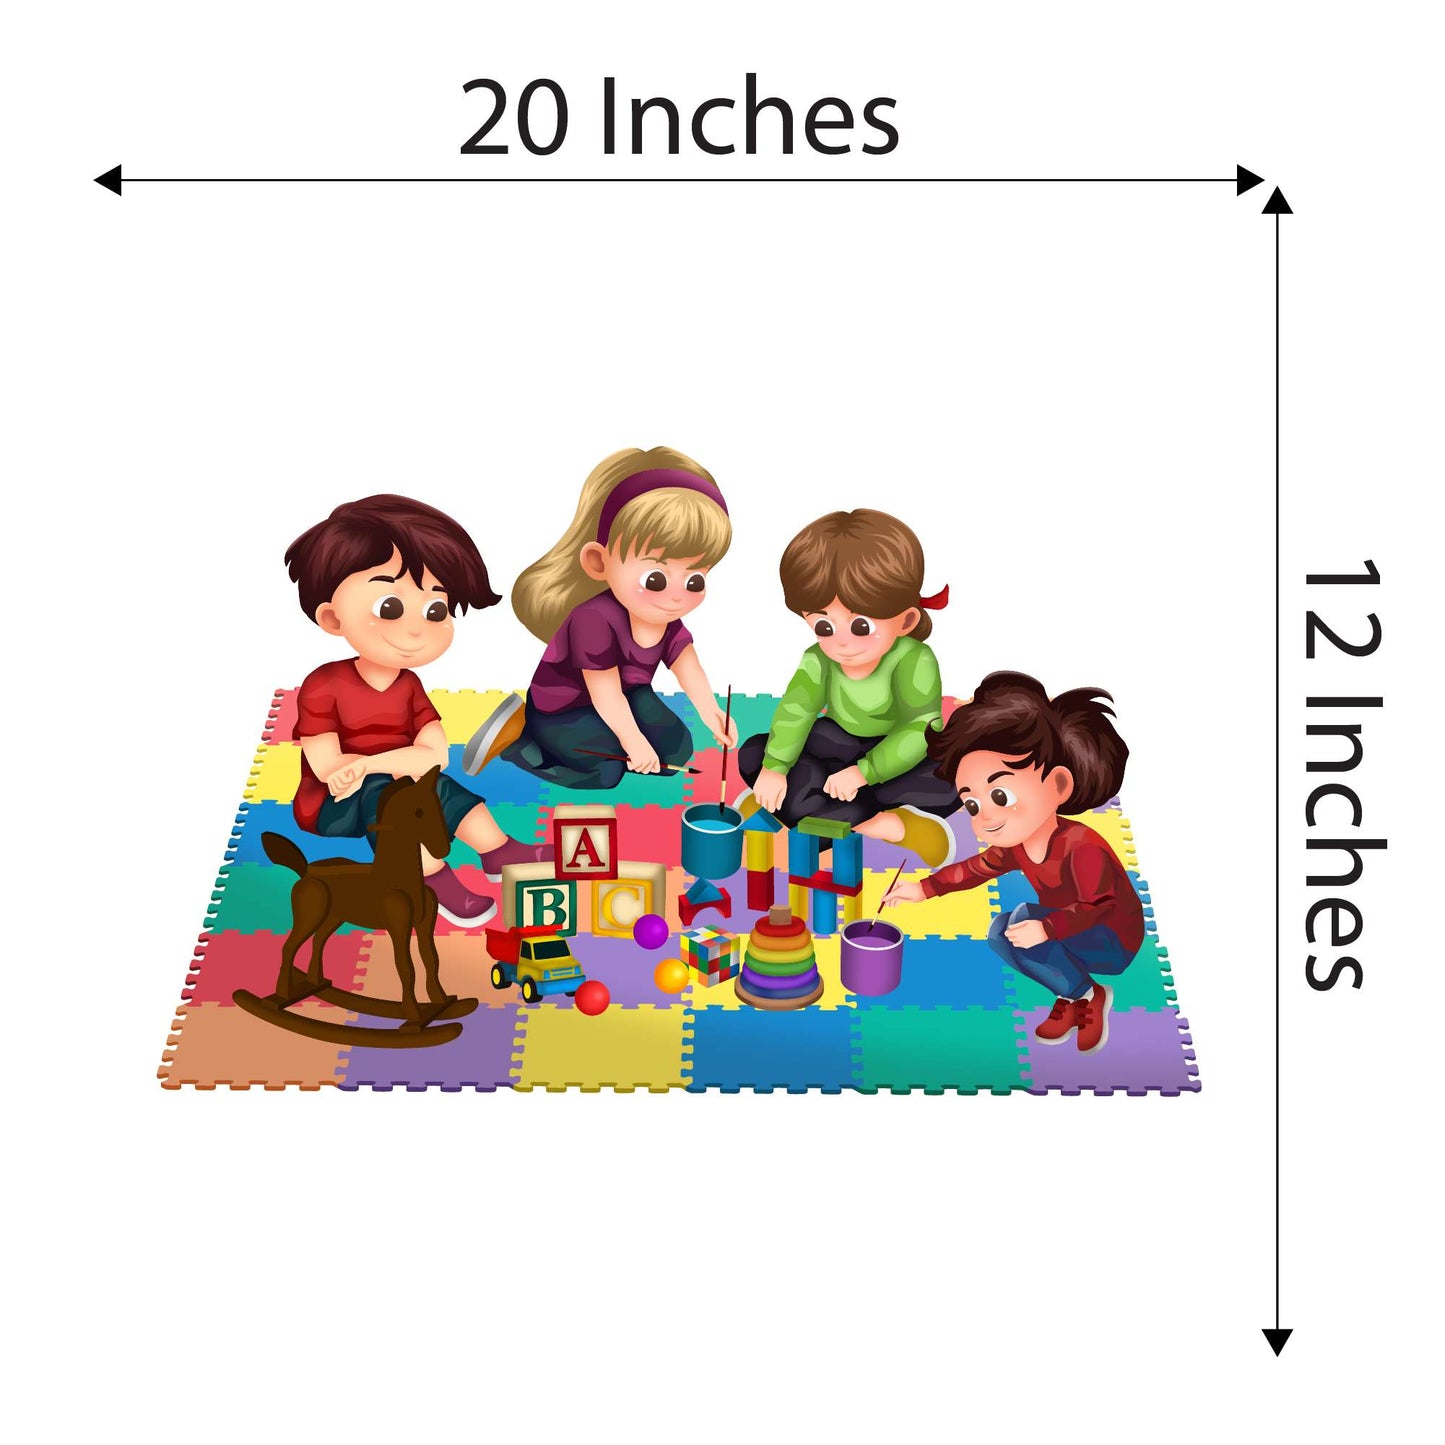 Design With Vinyl Playful Kids Wall Decal Cute Children Playing With Toys Colorful Design - Size: